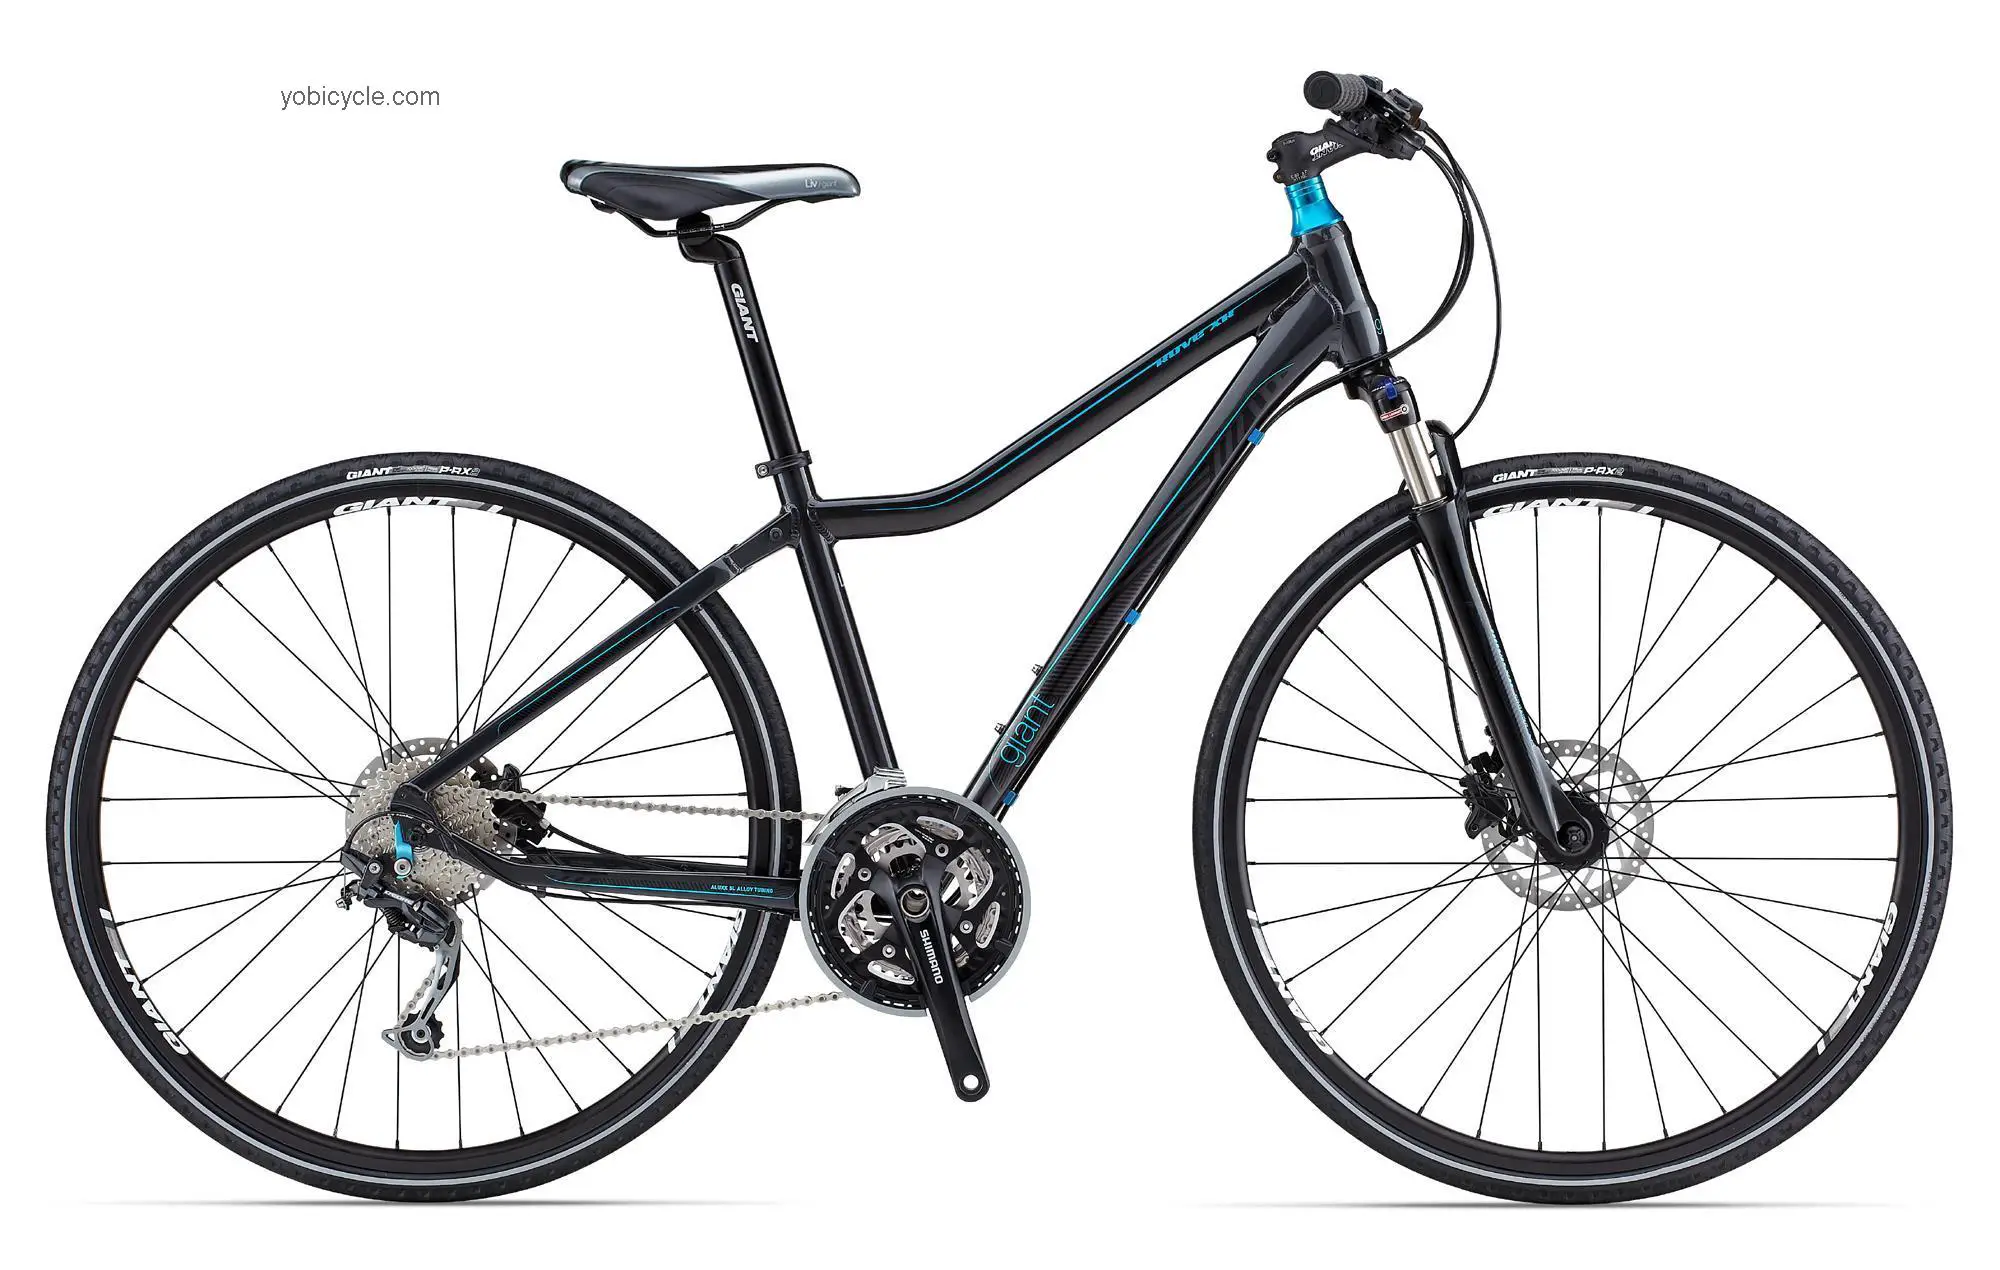 Giant Rove XR 2013 comparison online with competitors